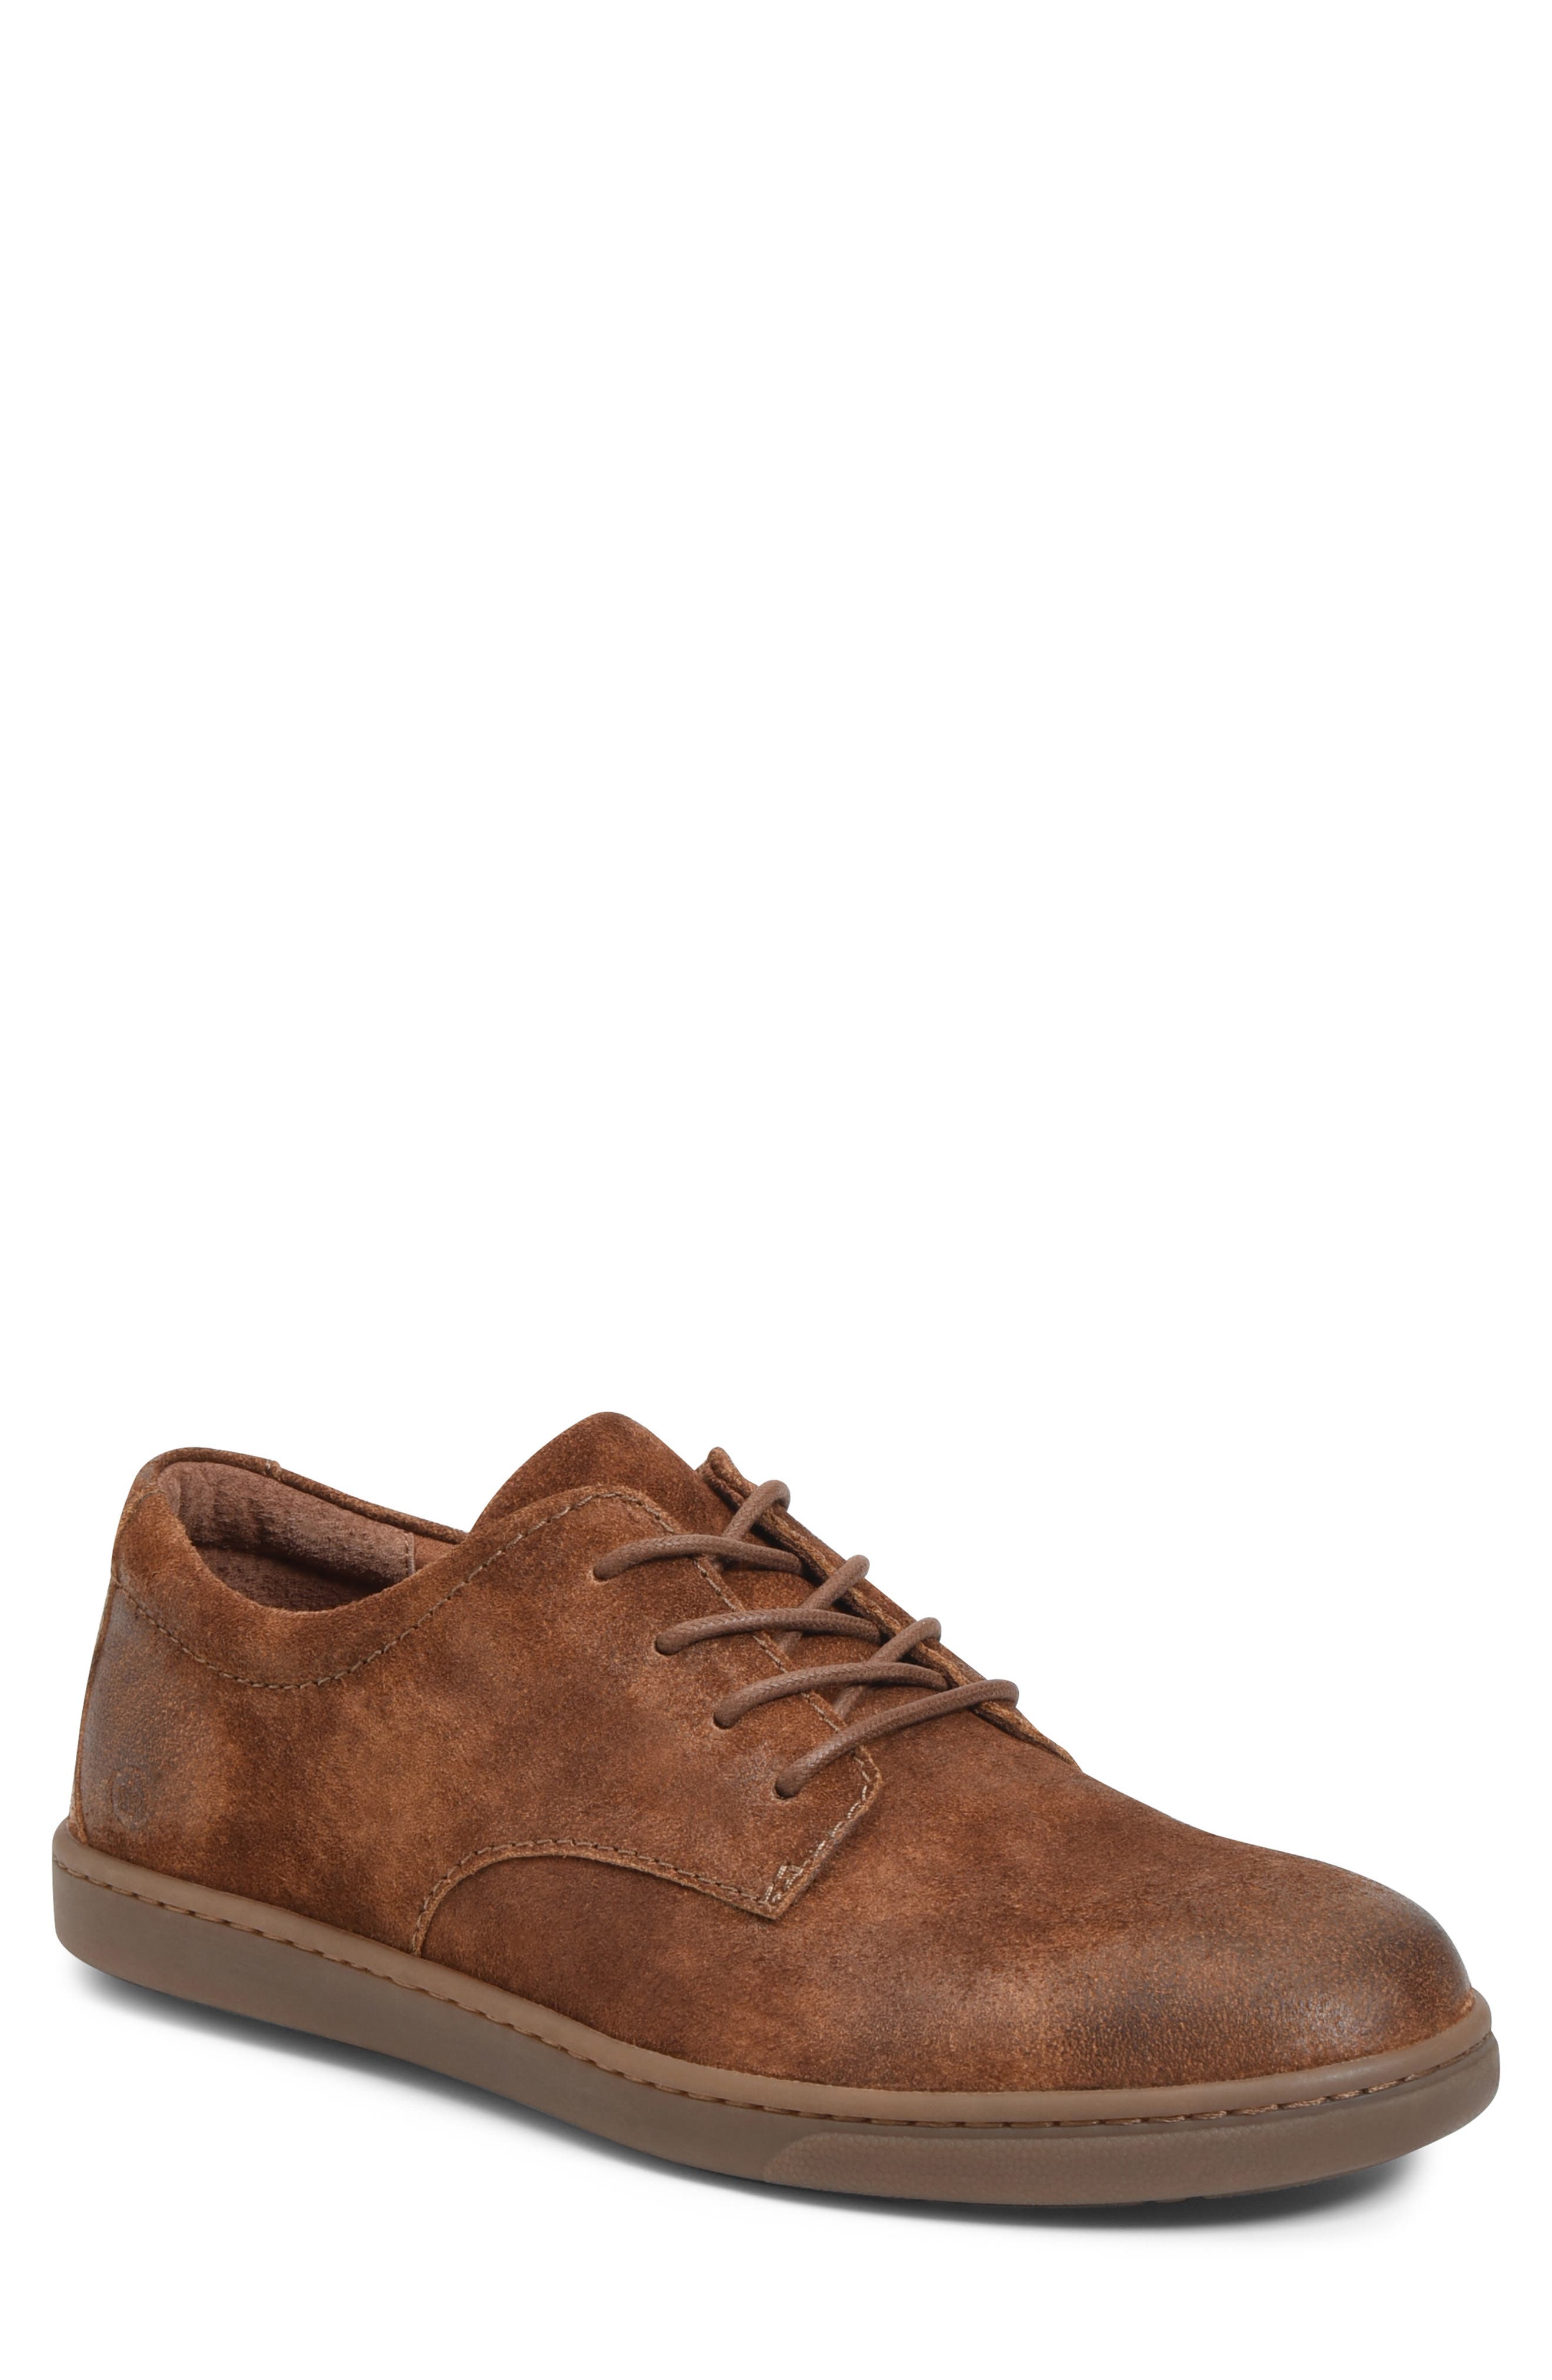 nordstrom rack mens shoes clearance